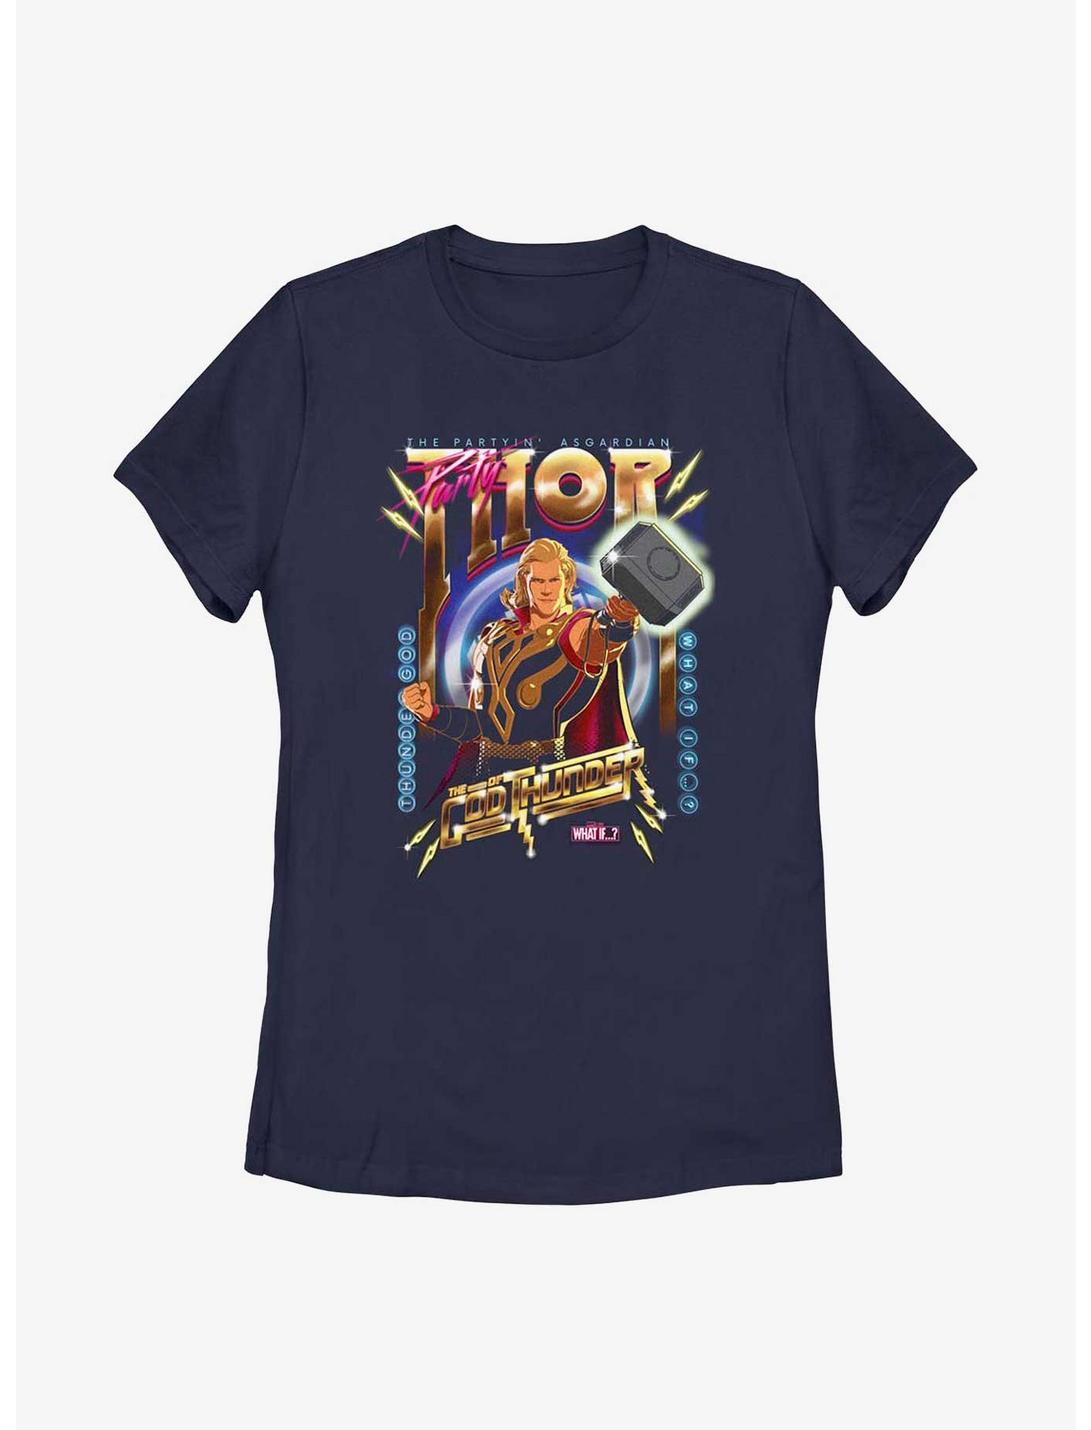 Marvel What If...? Party In Asgardian Womens T-Shirt, NAVY, hi-res